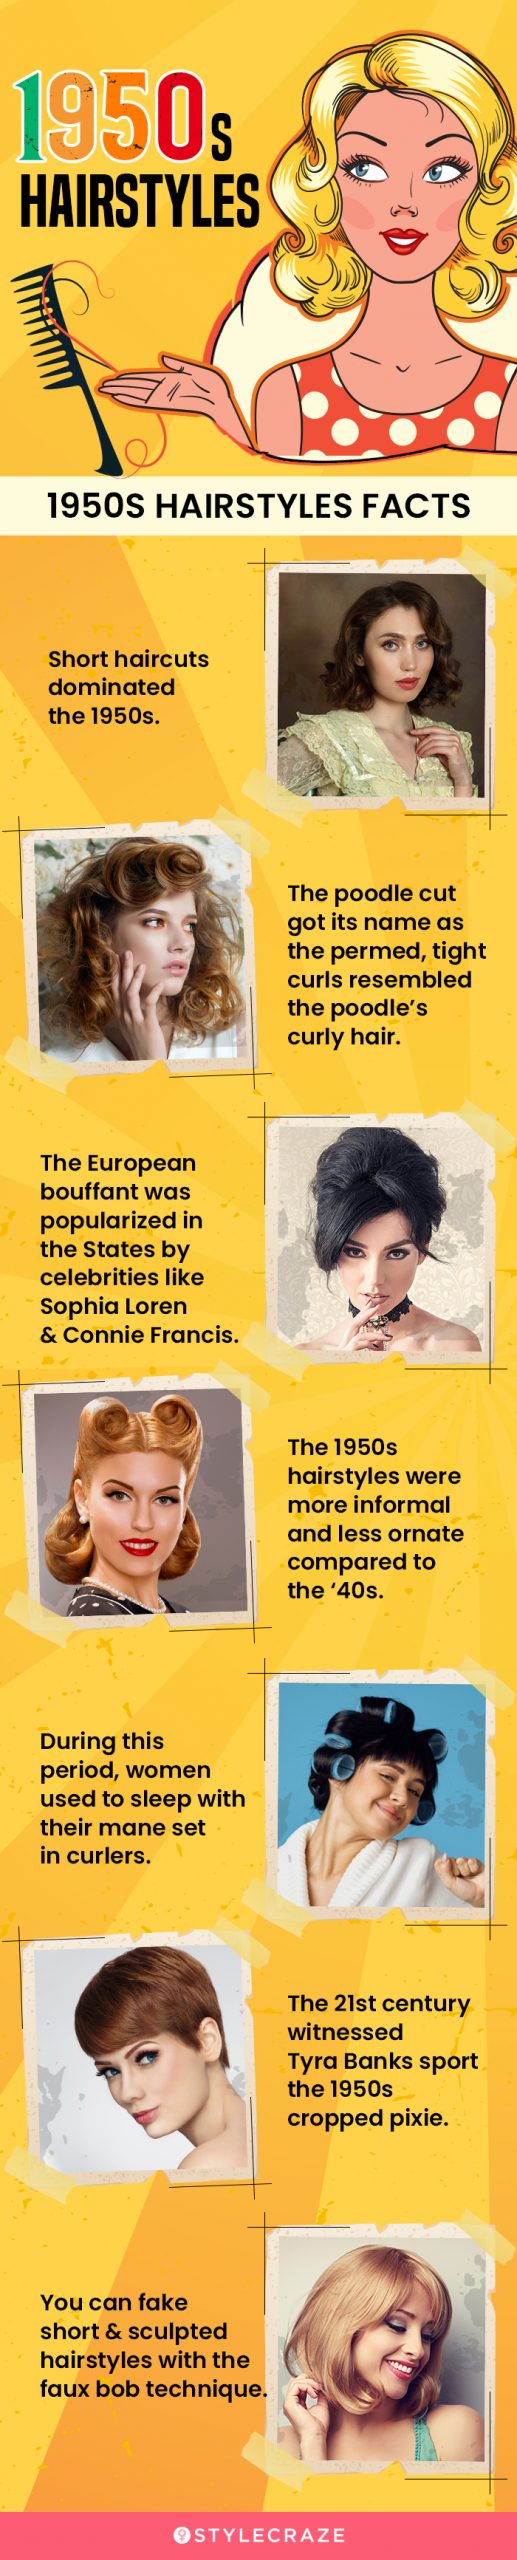 1950s hairstyles [infographic]